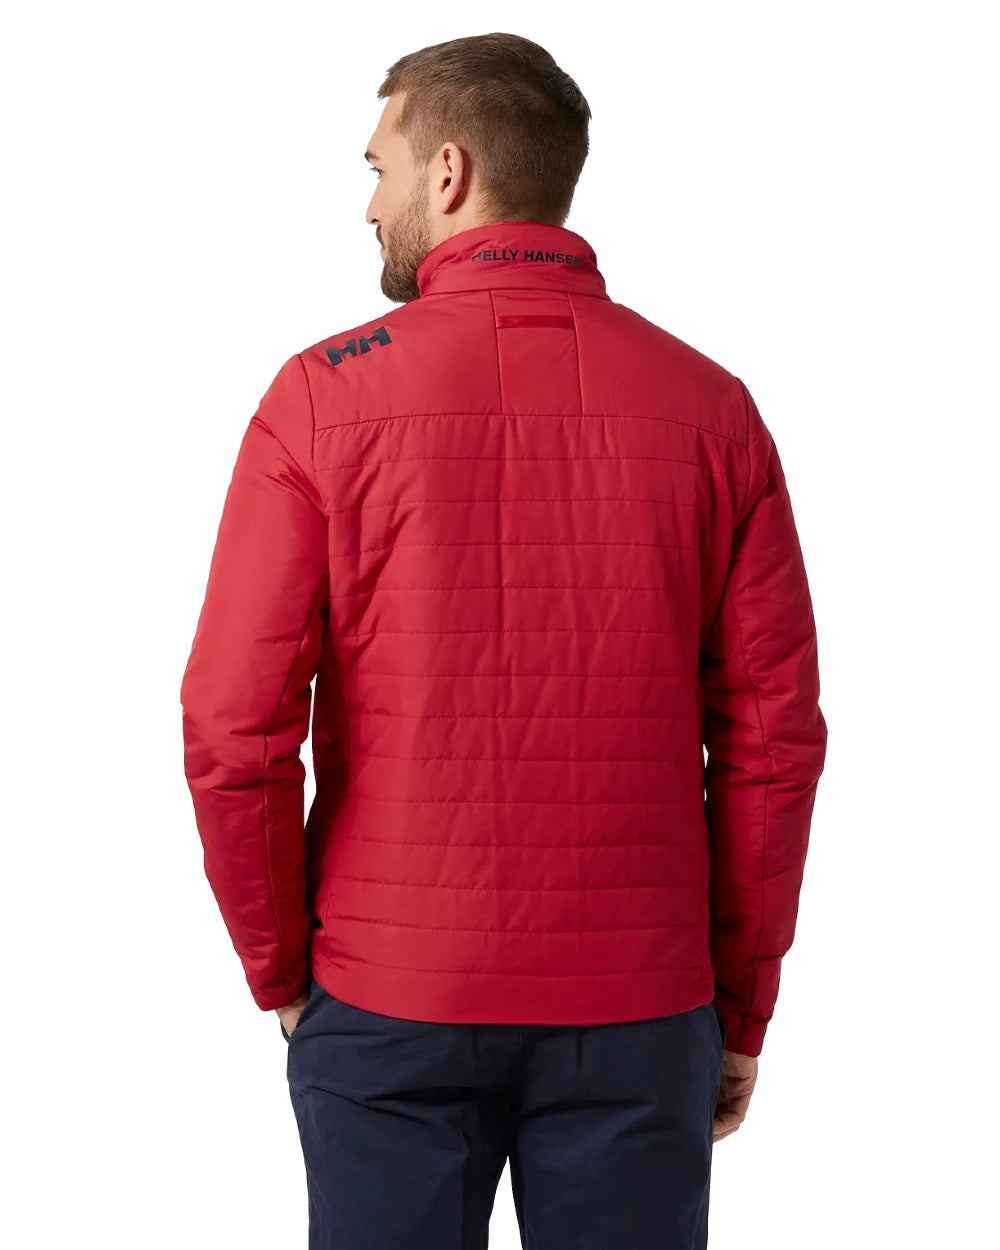 Helly Hansen Mens Crew Insulated Sailing Jacket 2.0 in Red 